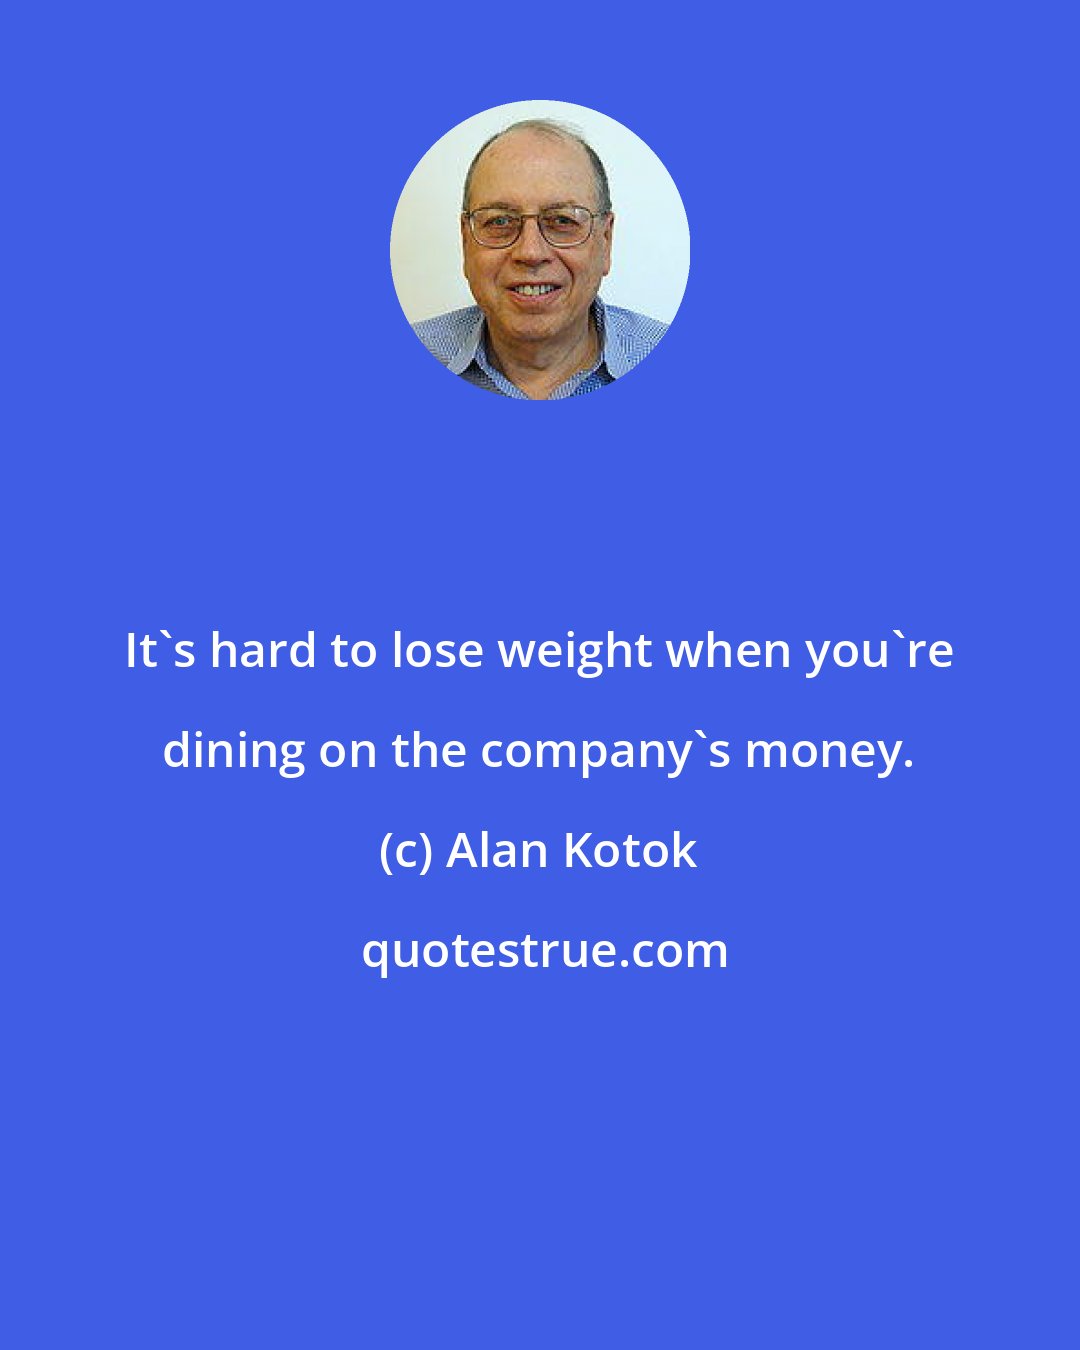 Alan Kotok: It's hard to lose weight when you're dining on the company's money.